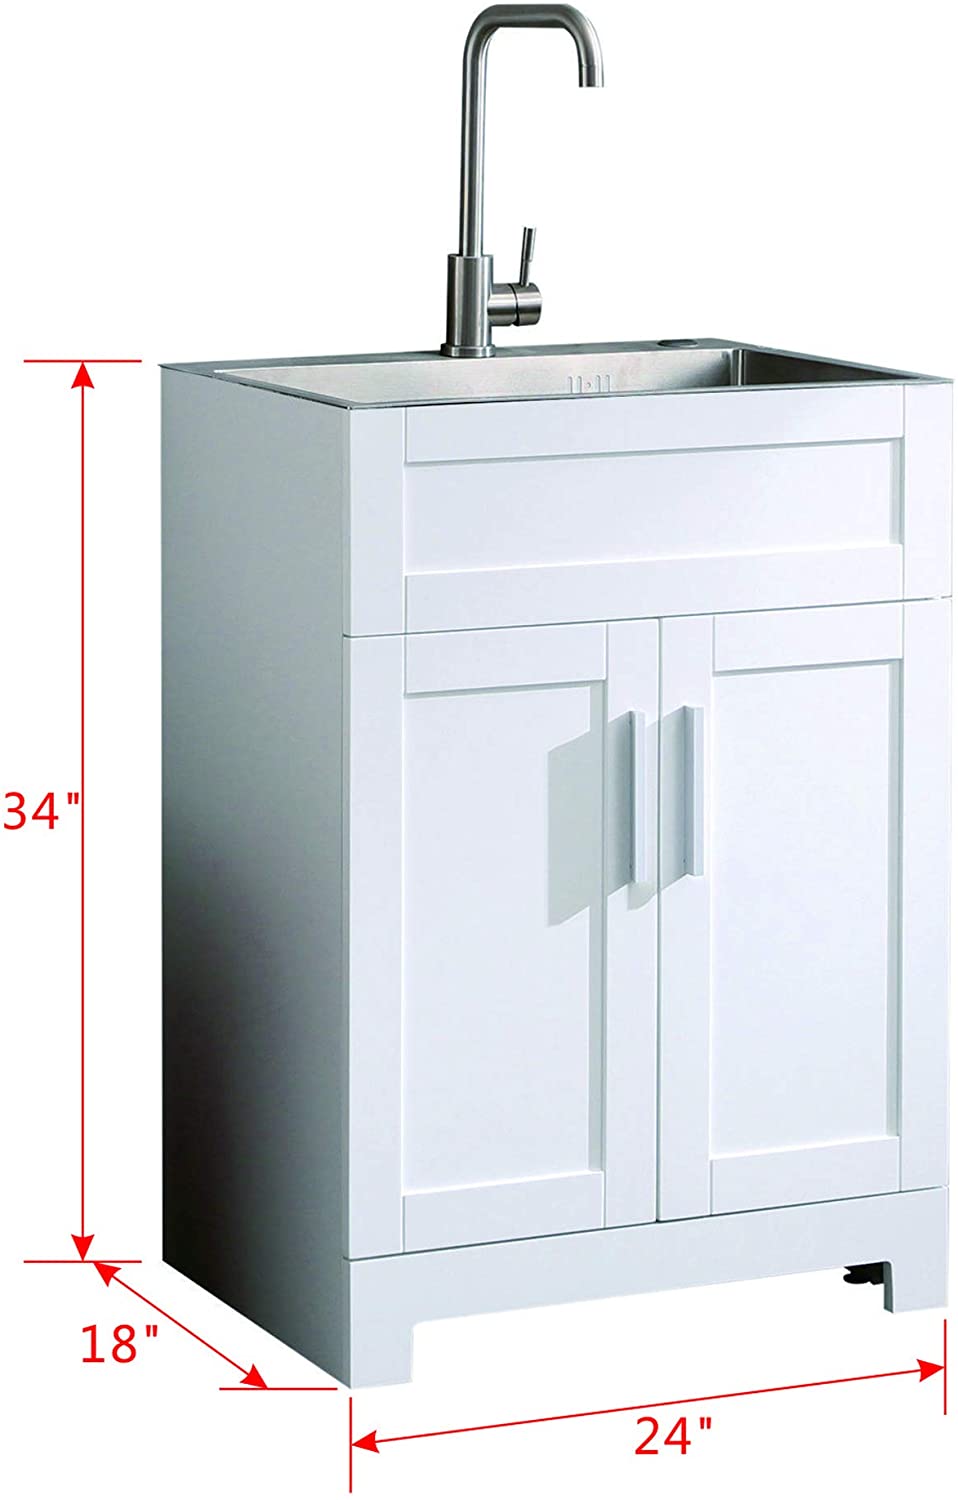 Goodyo 24" White Laundry Utility Cabinet w/Stainless Steel Sink and Faucet - image 4 of 8